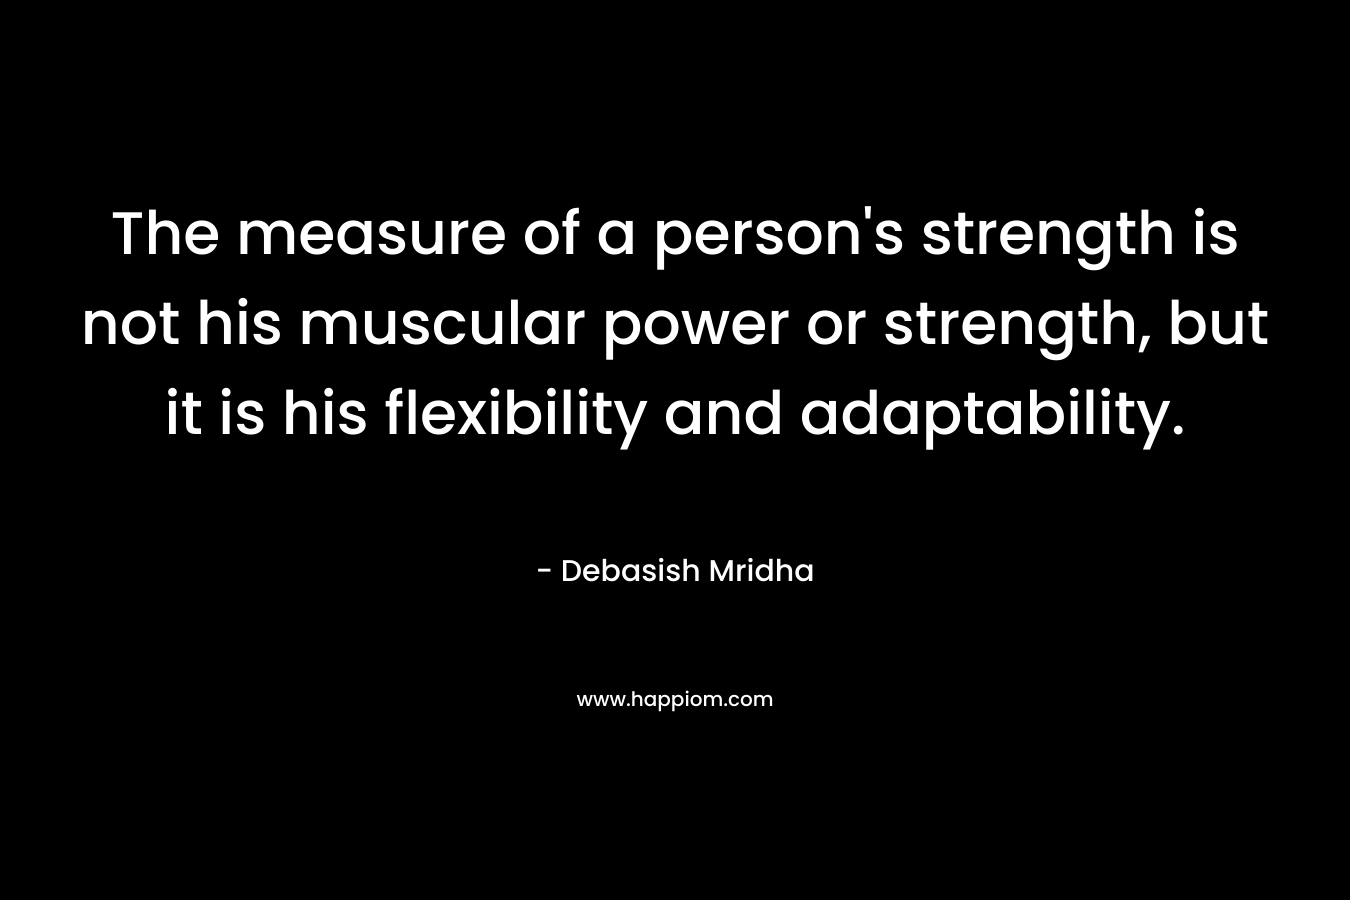 The measure of a person’s strength is not his muscular power or strength, but it is his flexibility and adaptability. – Debasish Mridha